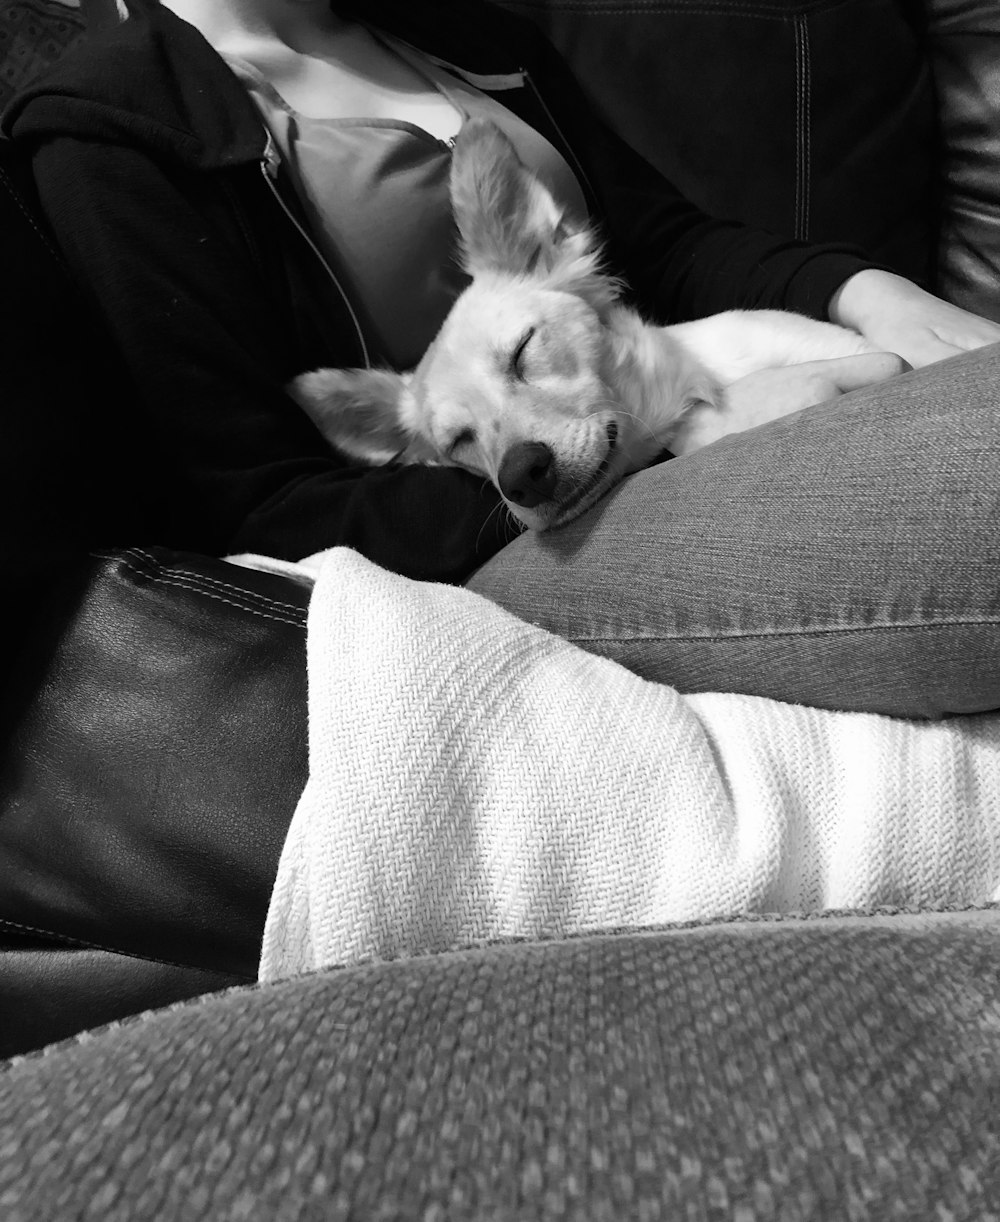 grayscale photography of dog sleeping on woman's lap